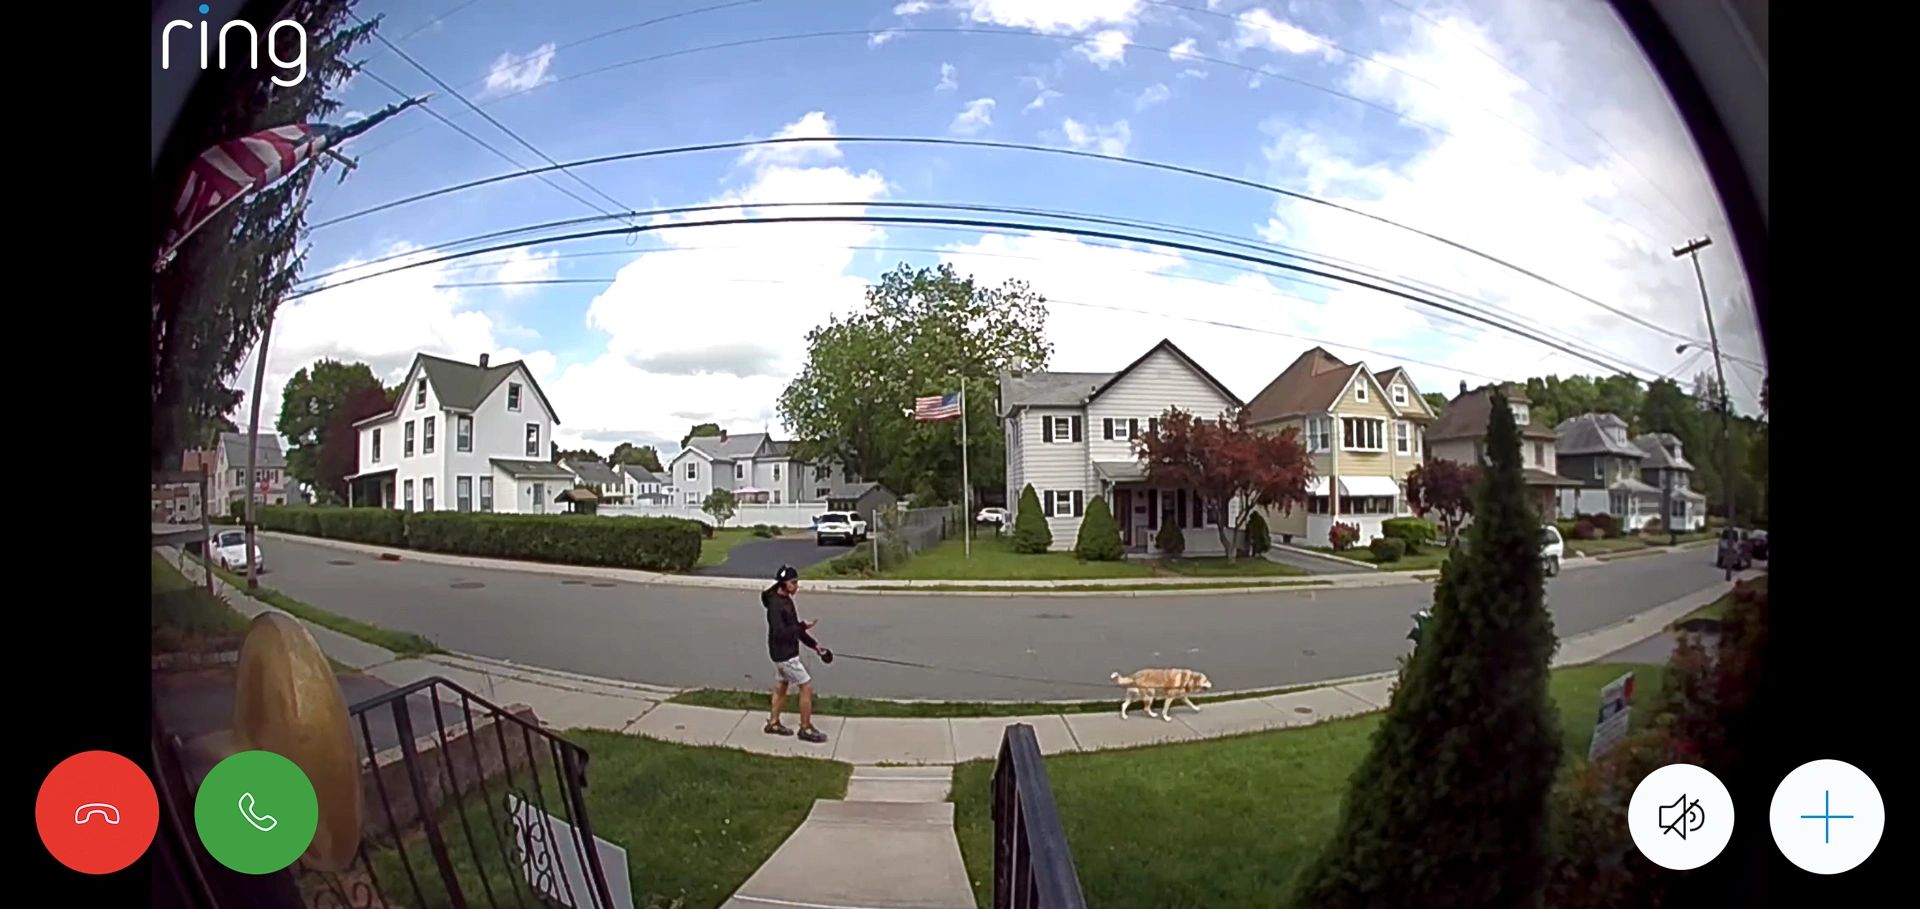 Home Security Camera Placement is Key to Success